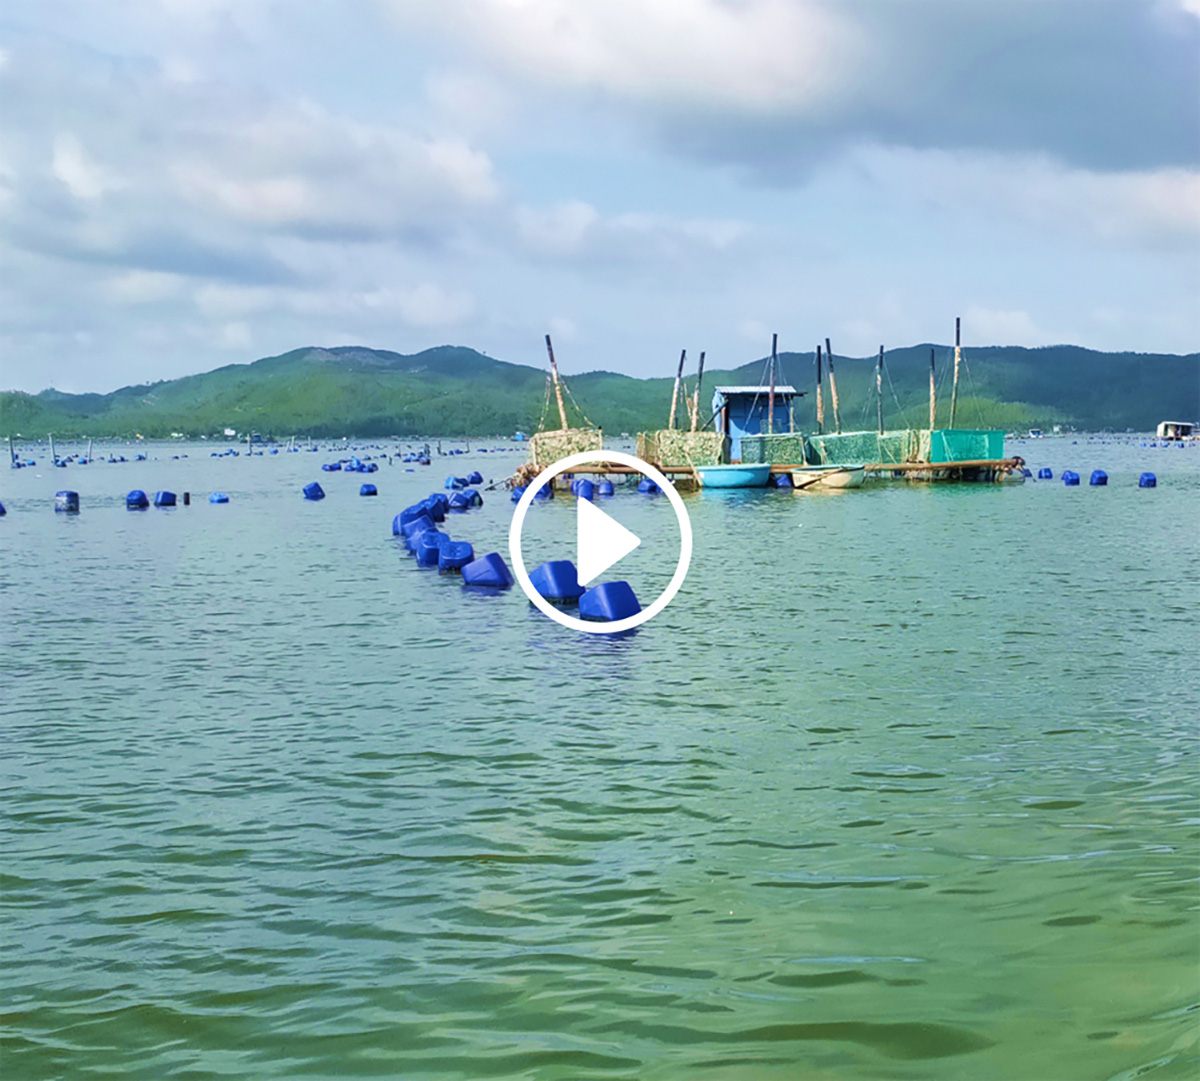 University of Technology Sydney (UTS) and Vietnamese National University of Engineering and Technology (VNU-UET) are addressing water quality challenges for lobster farmers in Phu Yen and removing arsenic from water supplies in the Red River Delta.